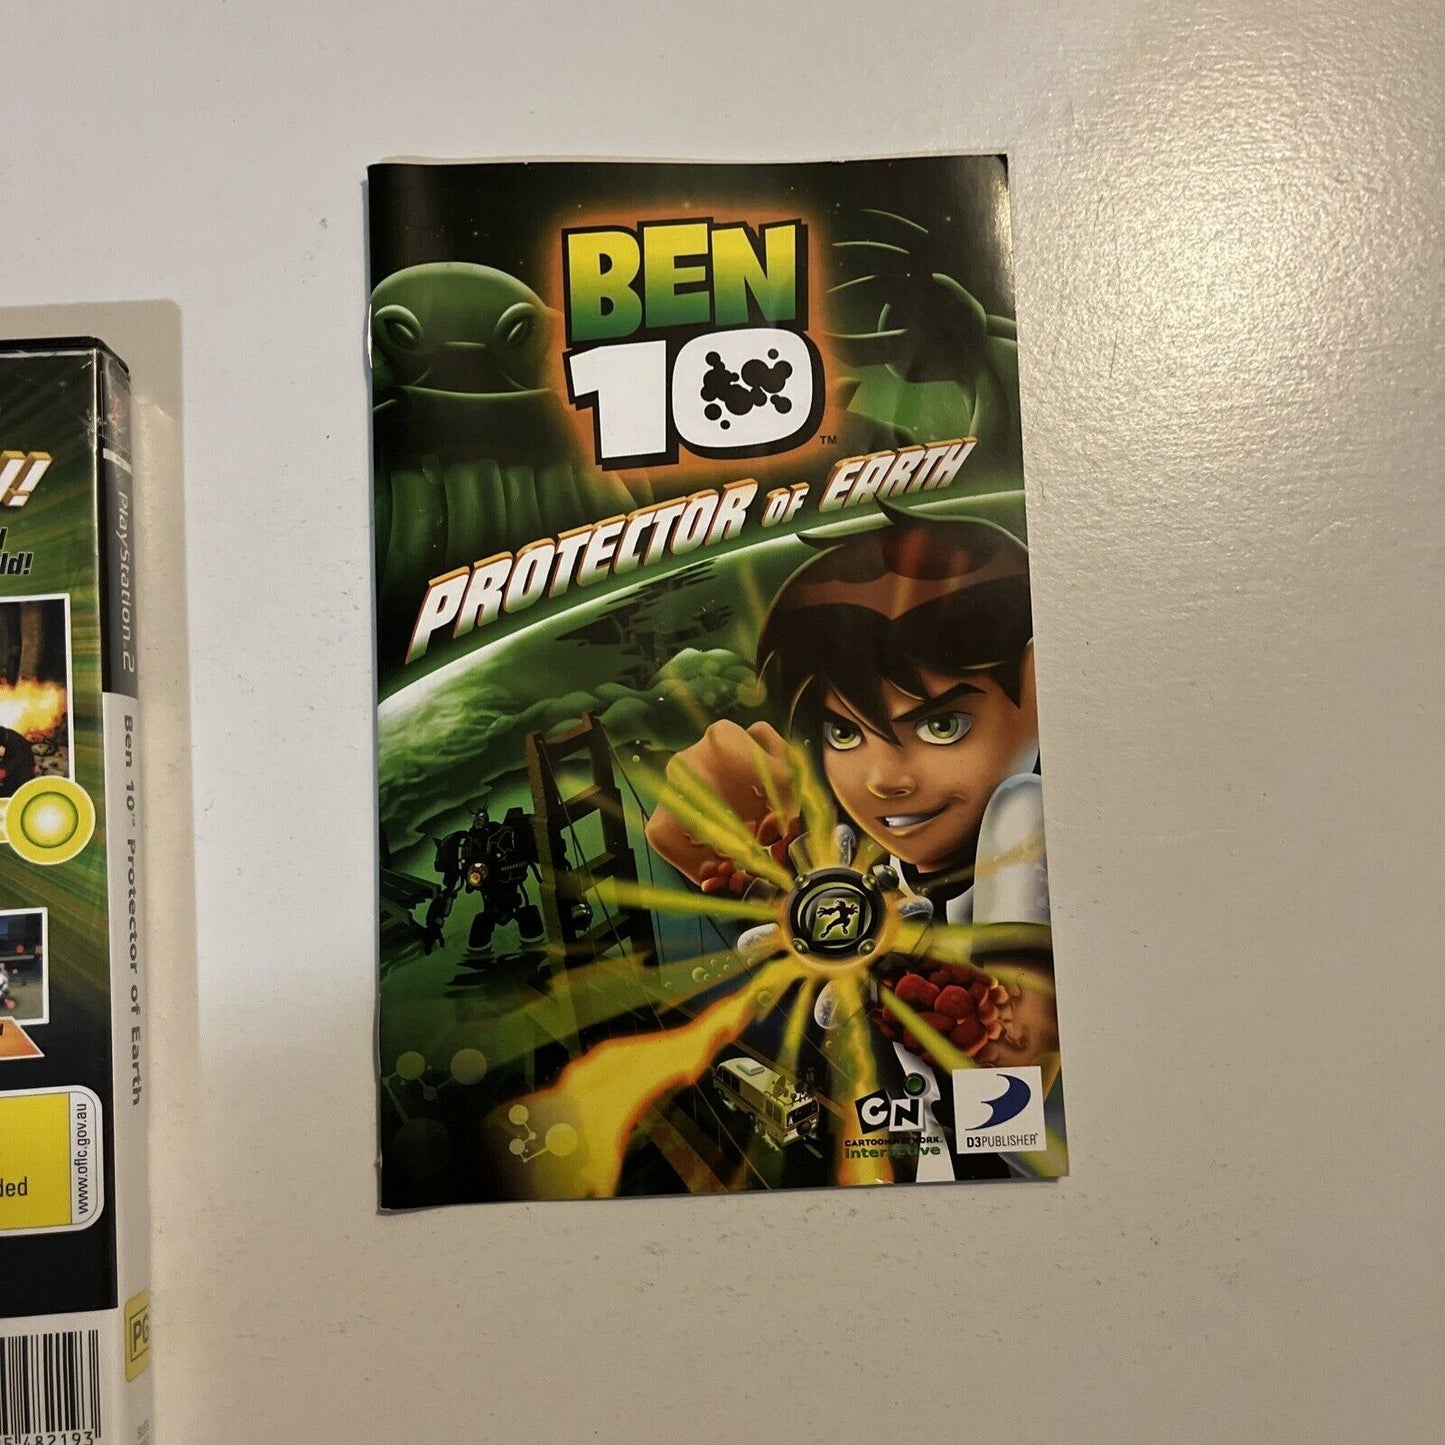 Ben 10 Protector of Earth - PS2 Playstation 2 PAL Game with Manual